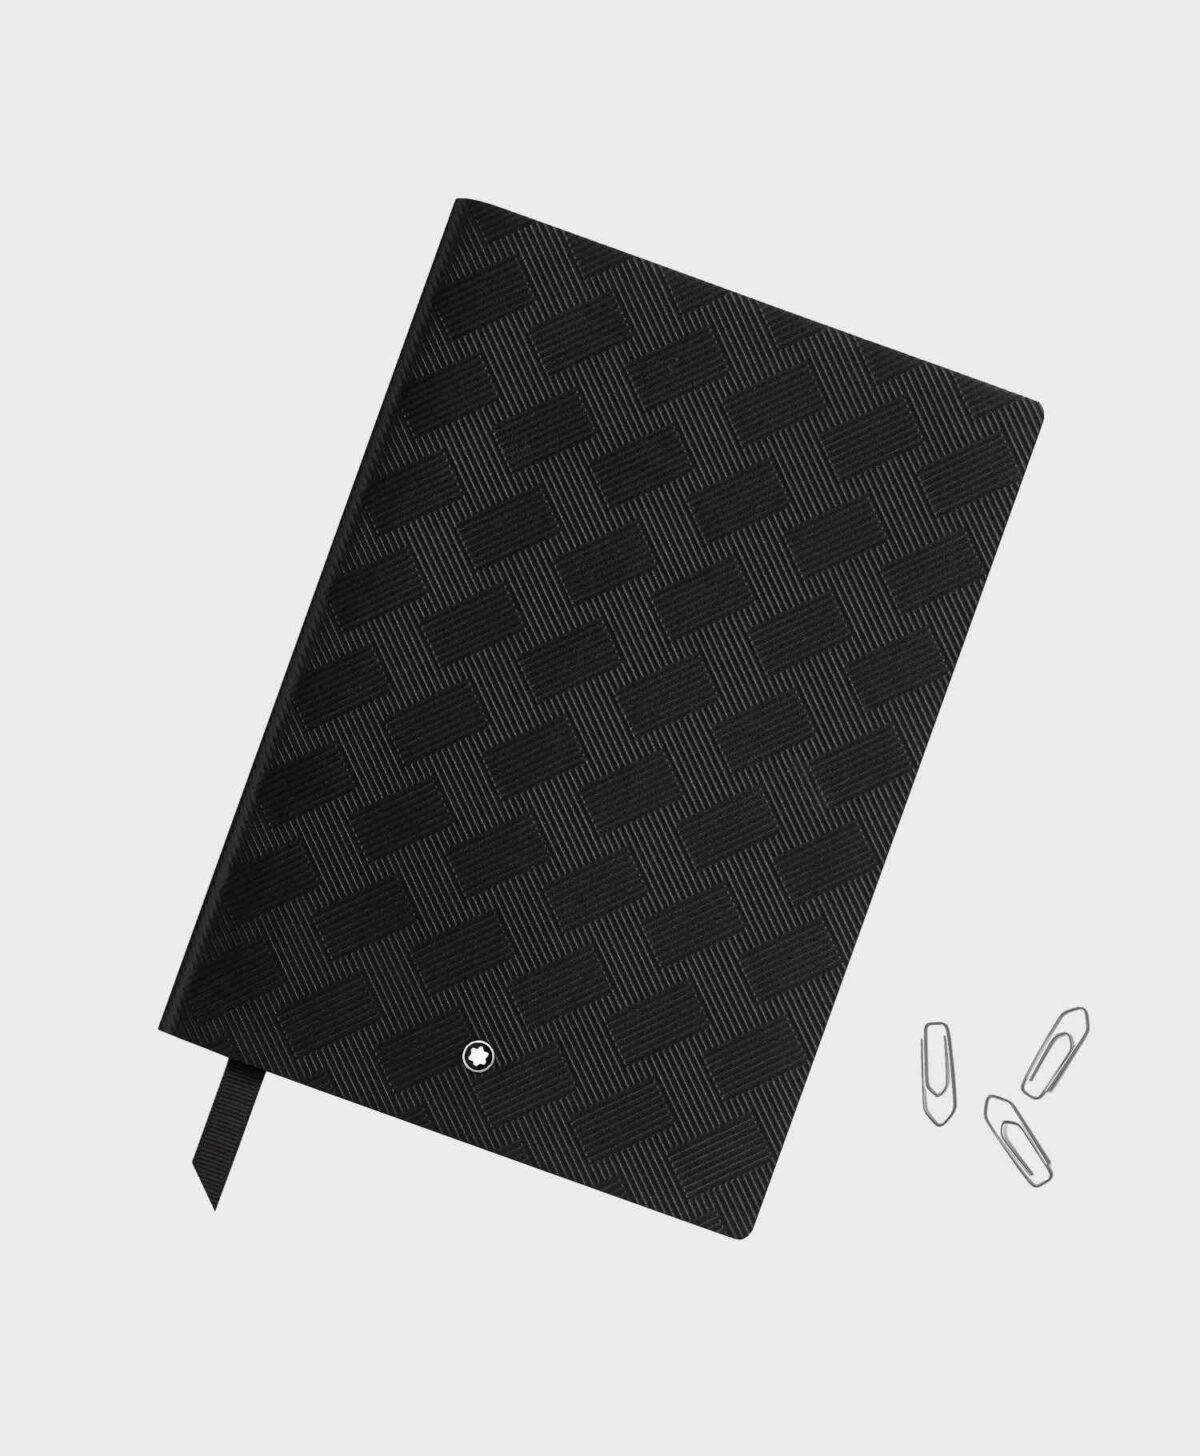 Notebook #146 small, Montblanc Extreme 3.0 collection, black lined MB-130578